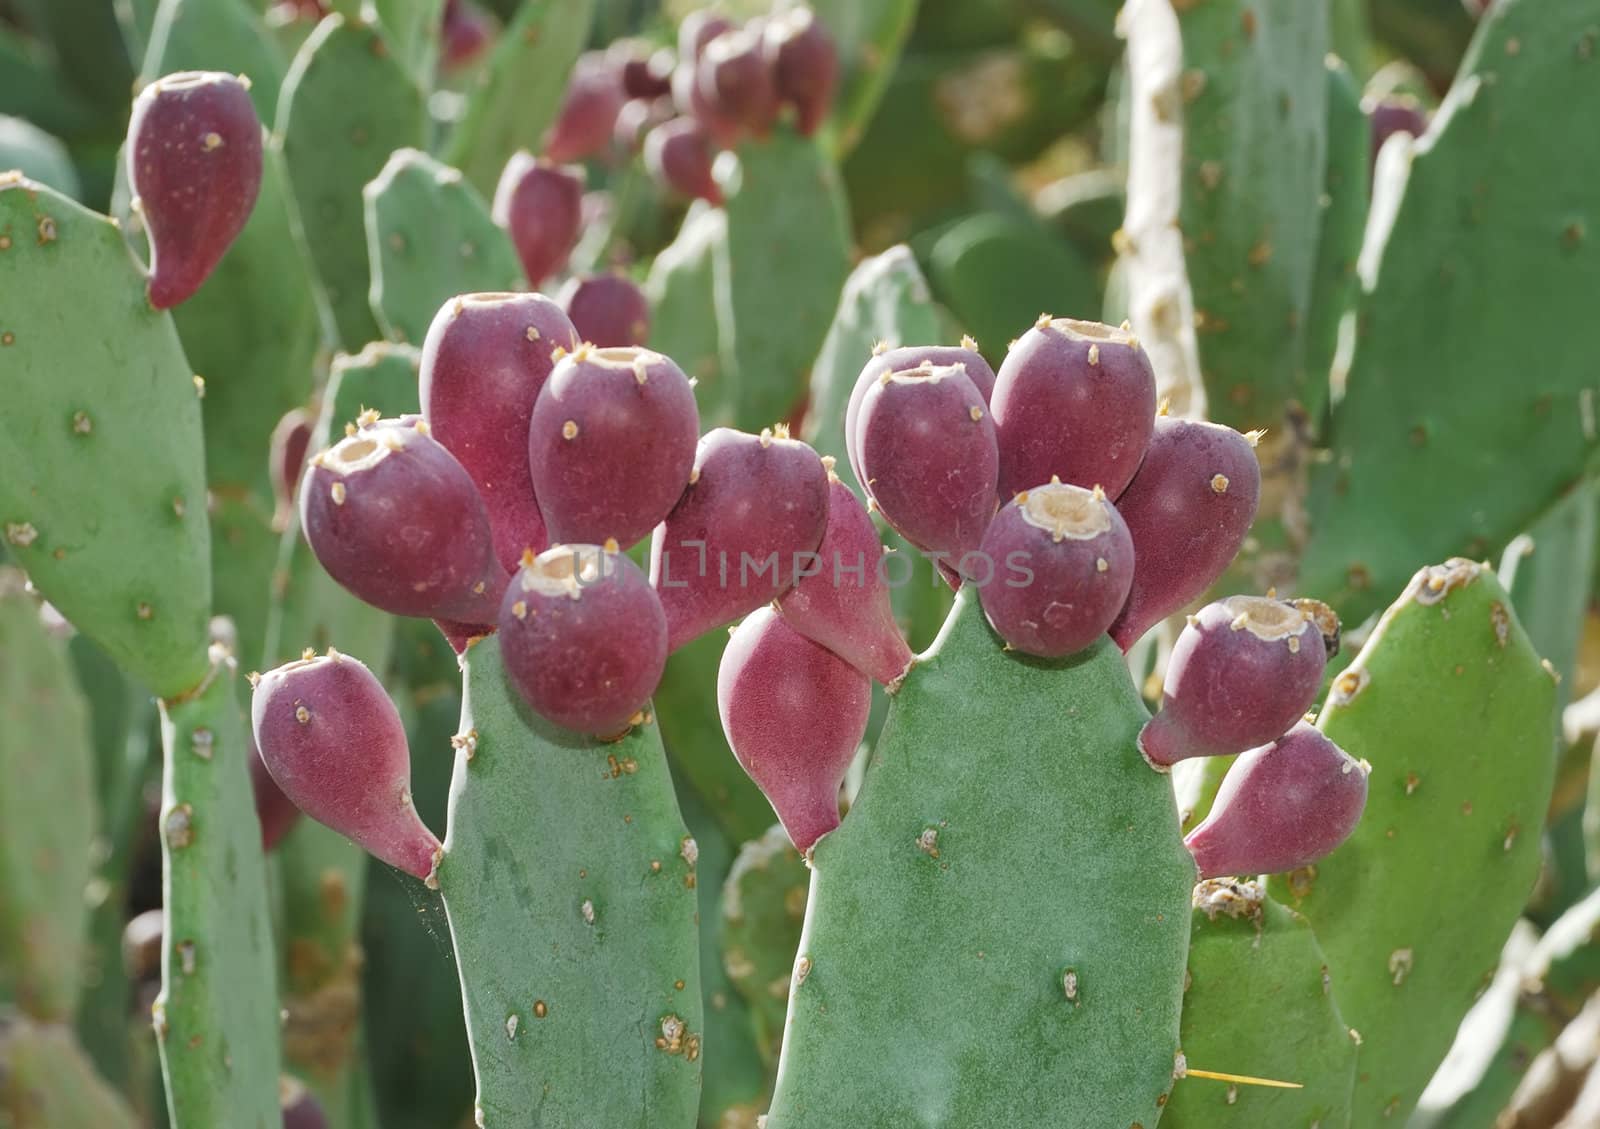 Prickly pears by whitechild